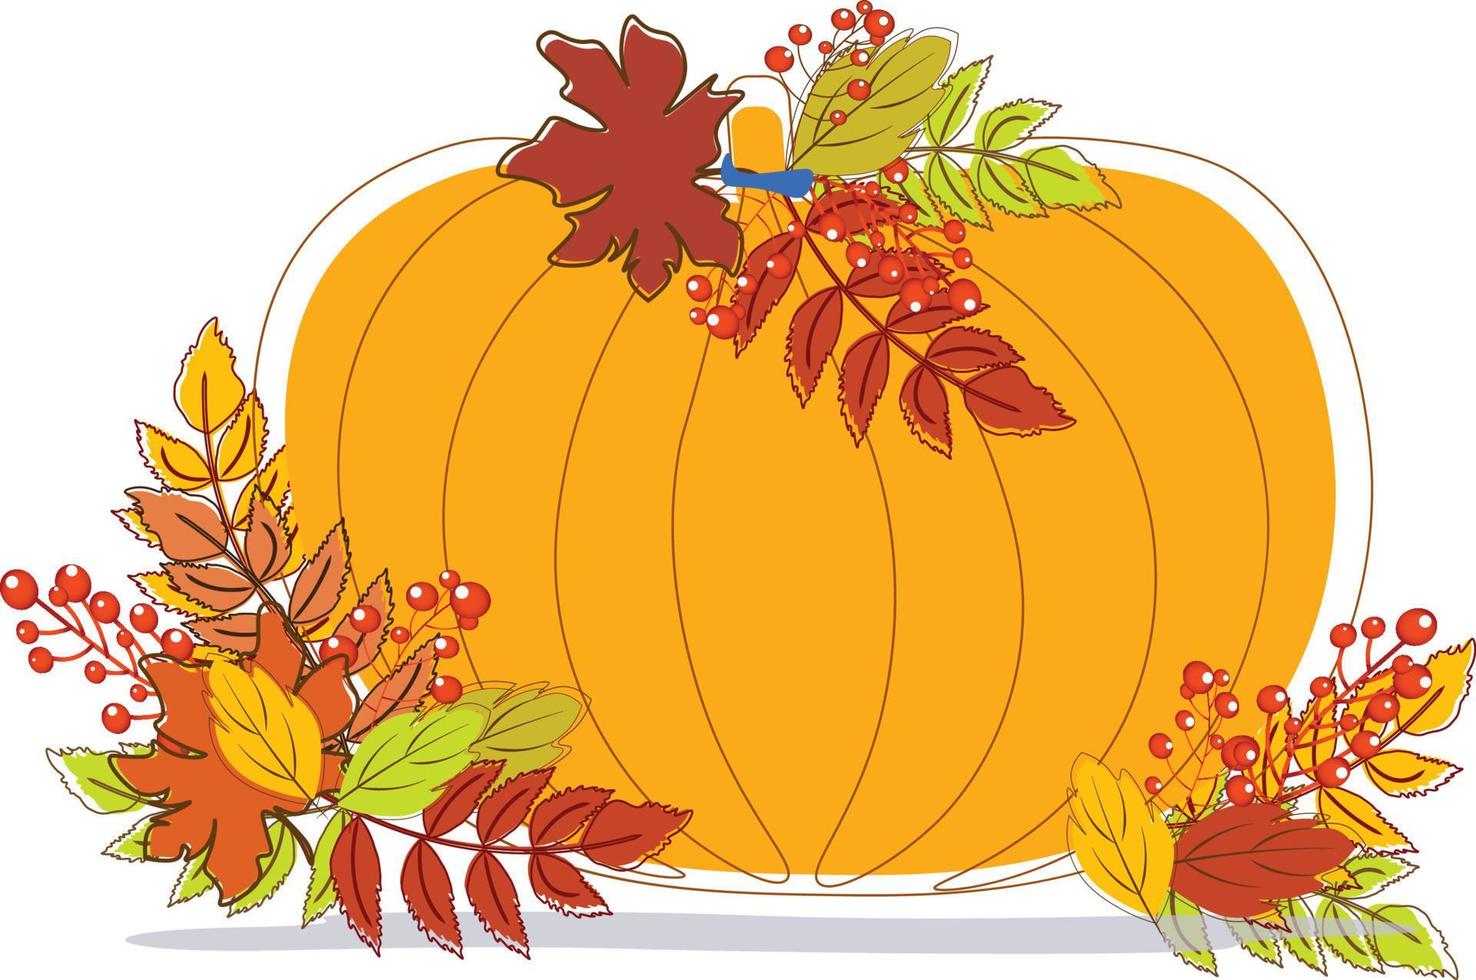 Pumpkin in autumn with autumn leaves vector for decoration and background illustration. Autumn theme pumpkin in isolated in white background